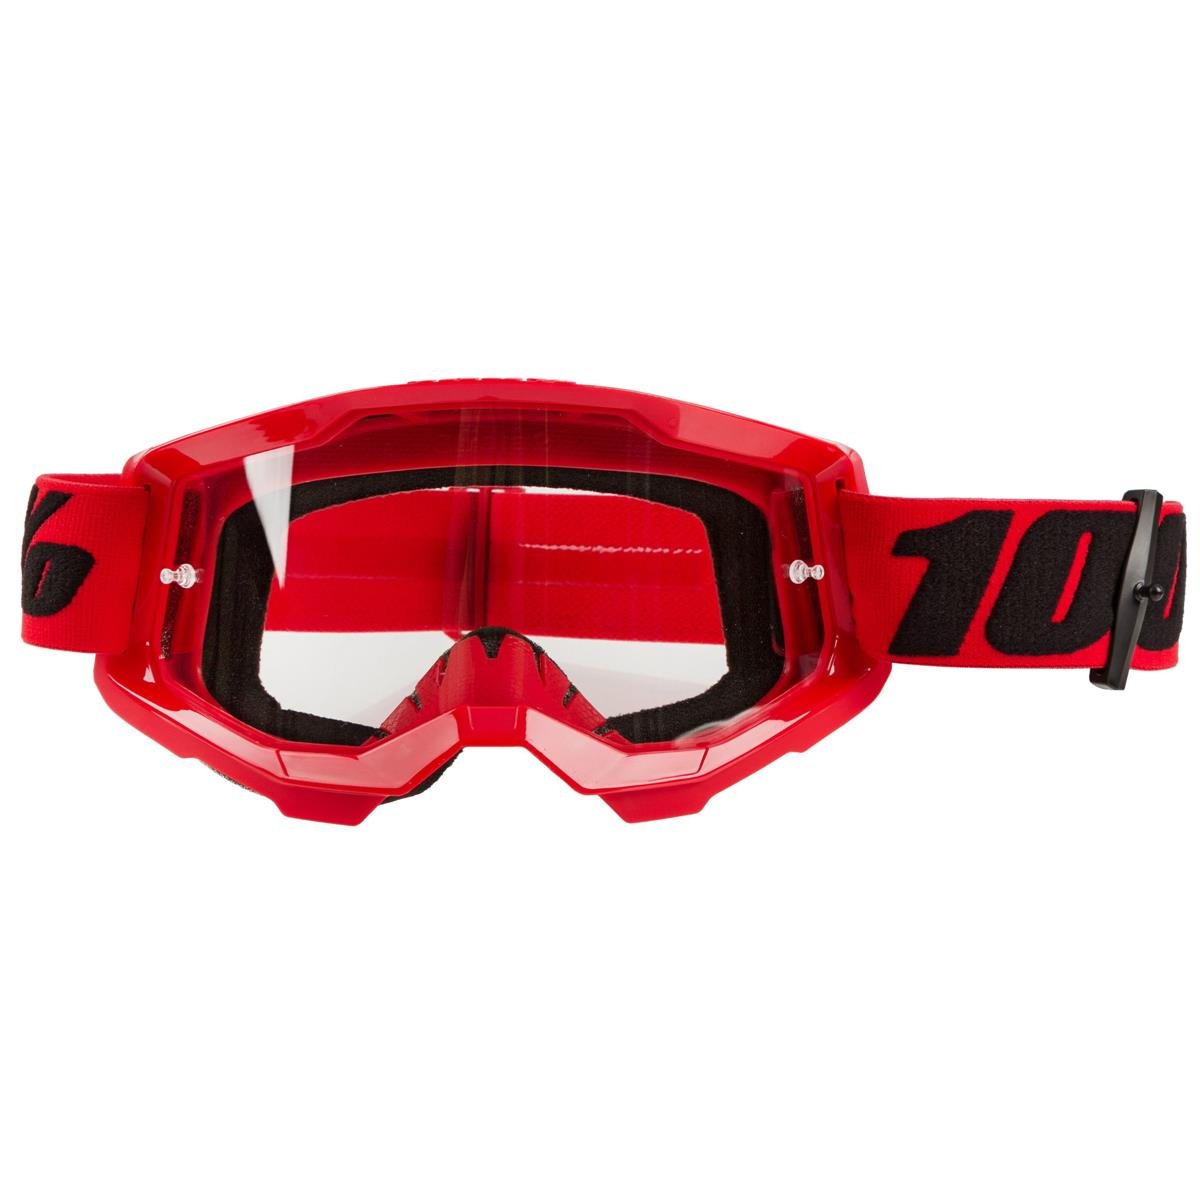 STRATA 2 Goggle Red Clear Lens